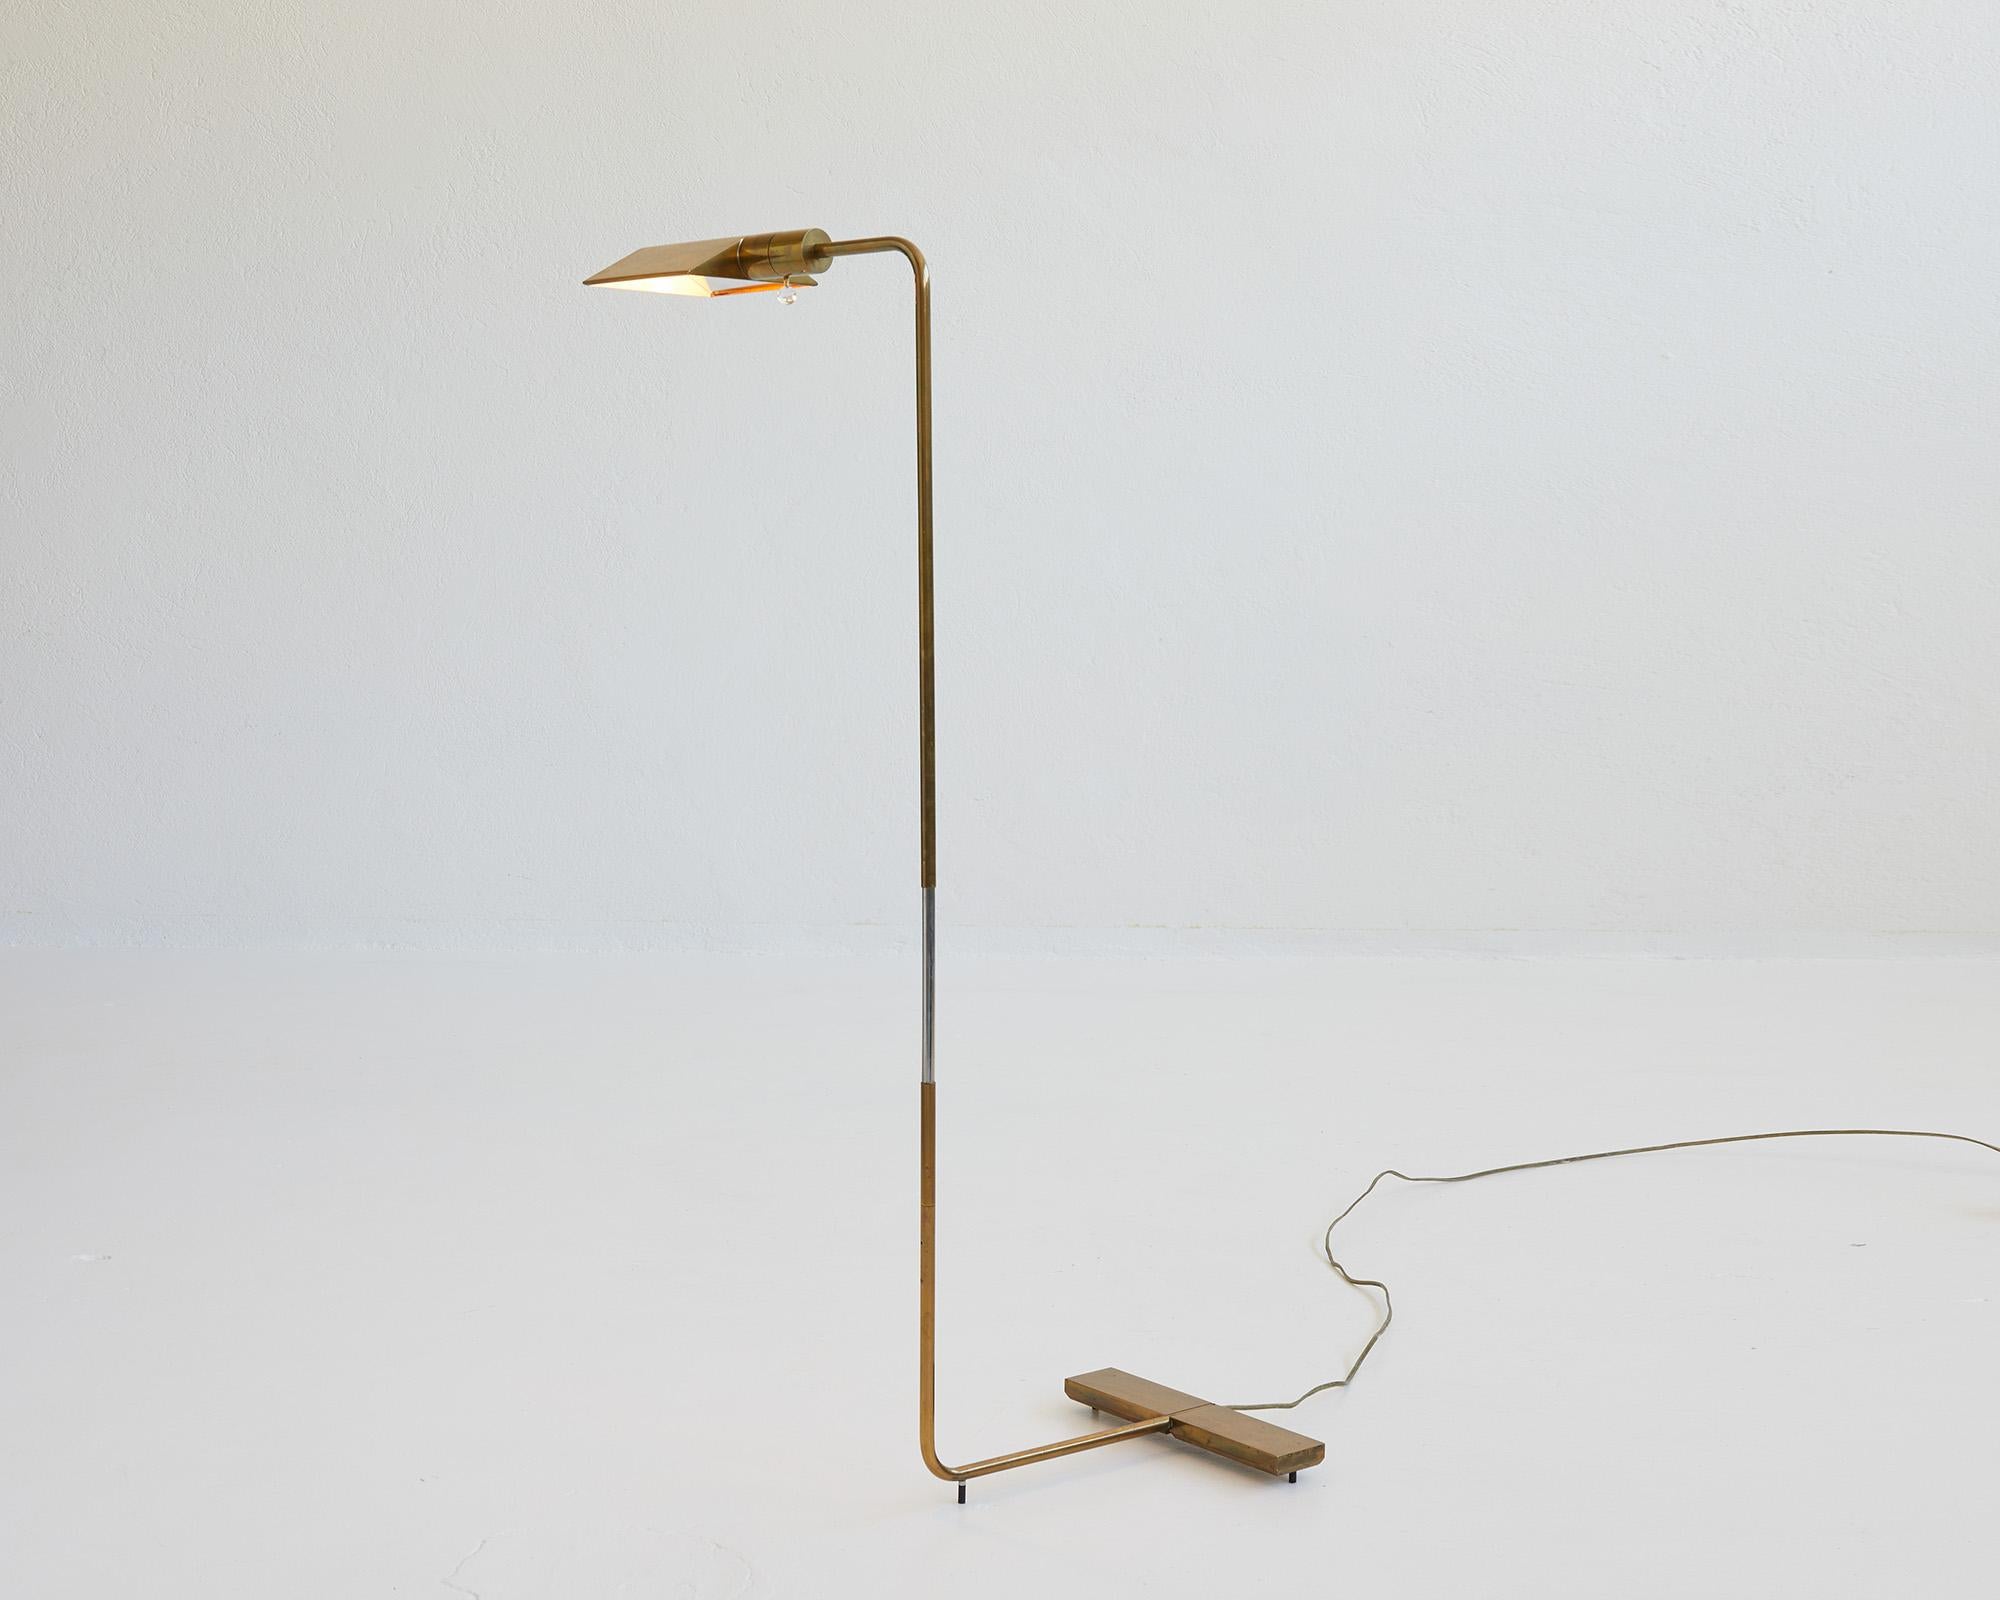 Cedric Hartman Low Profile Luminaire, brass floor lamp, model 1UWV, 1967

Beautiful early example of this iconic lamp by Cedric Hartman.
With brass tented shade and bar support, lucite dimmer switch, and adjustable stainless steel support.